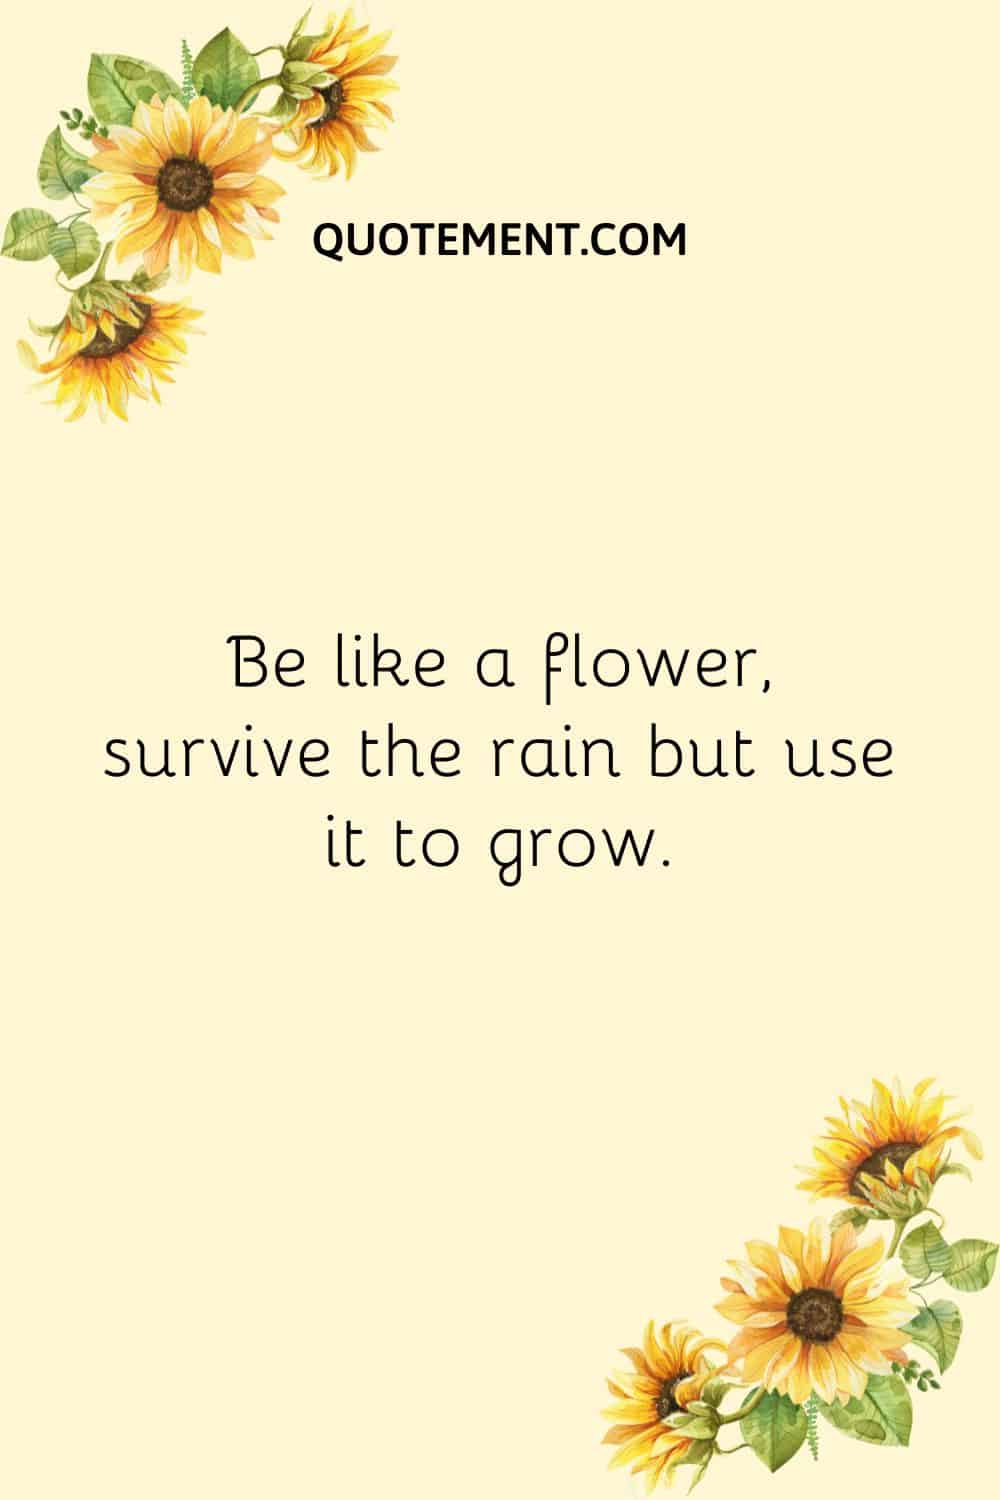 Be like a flower, survive the rain but use it to grow.